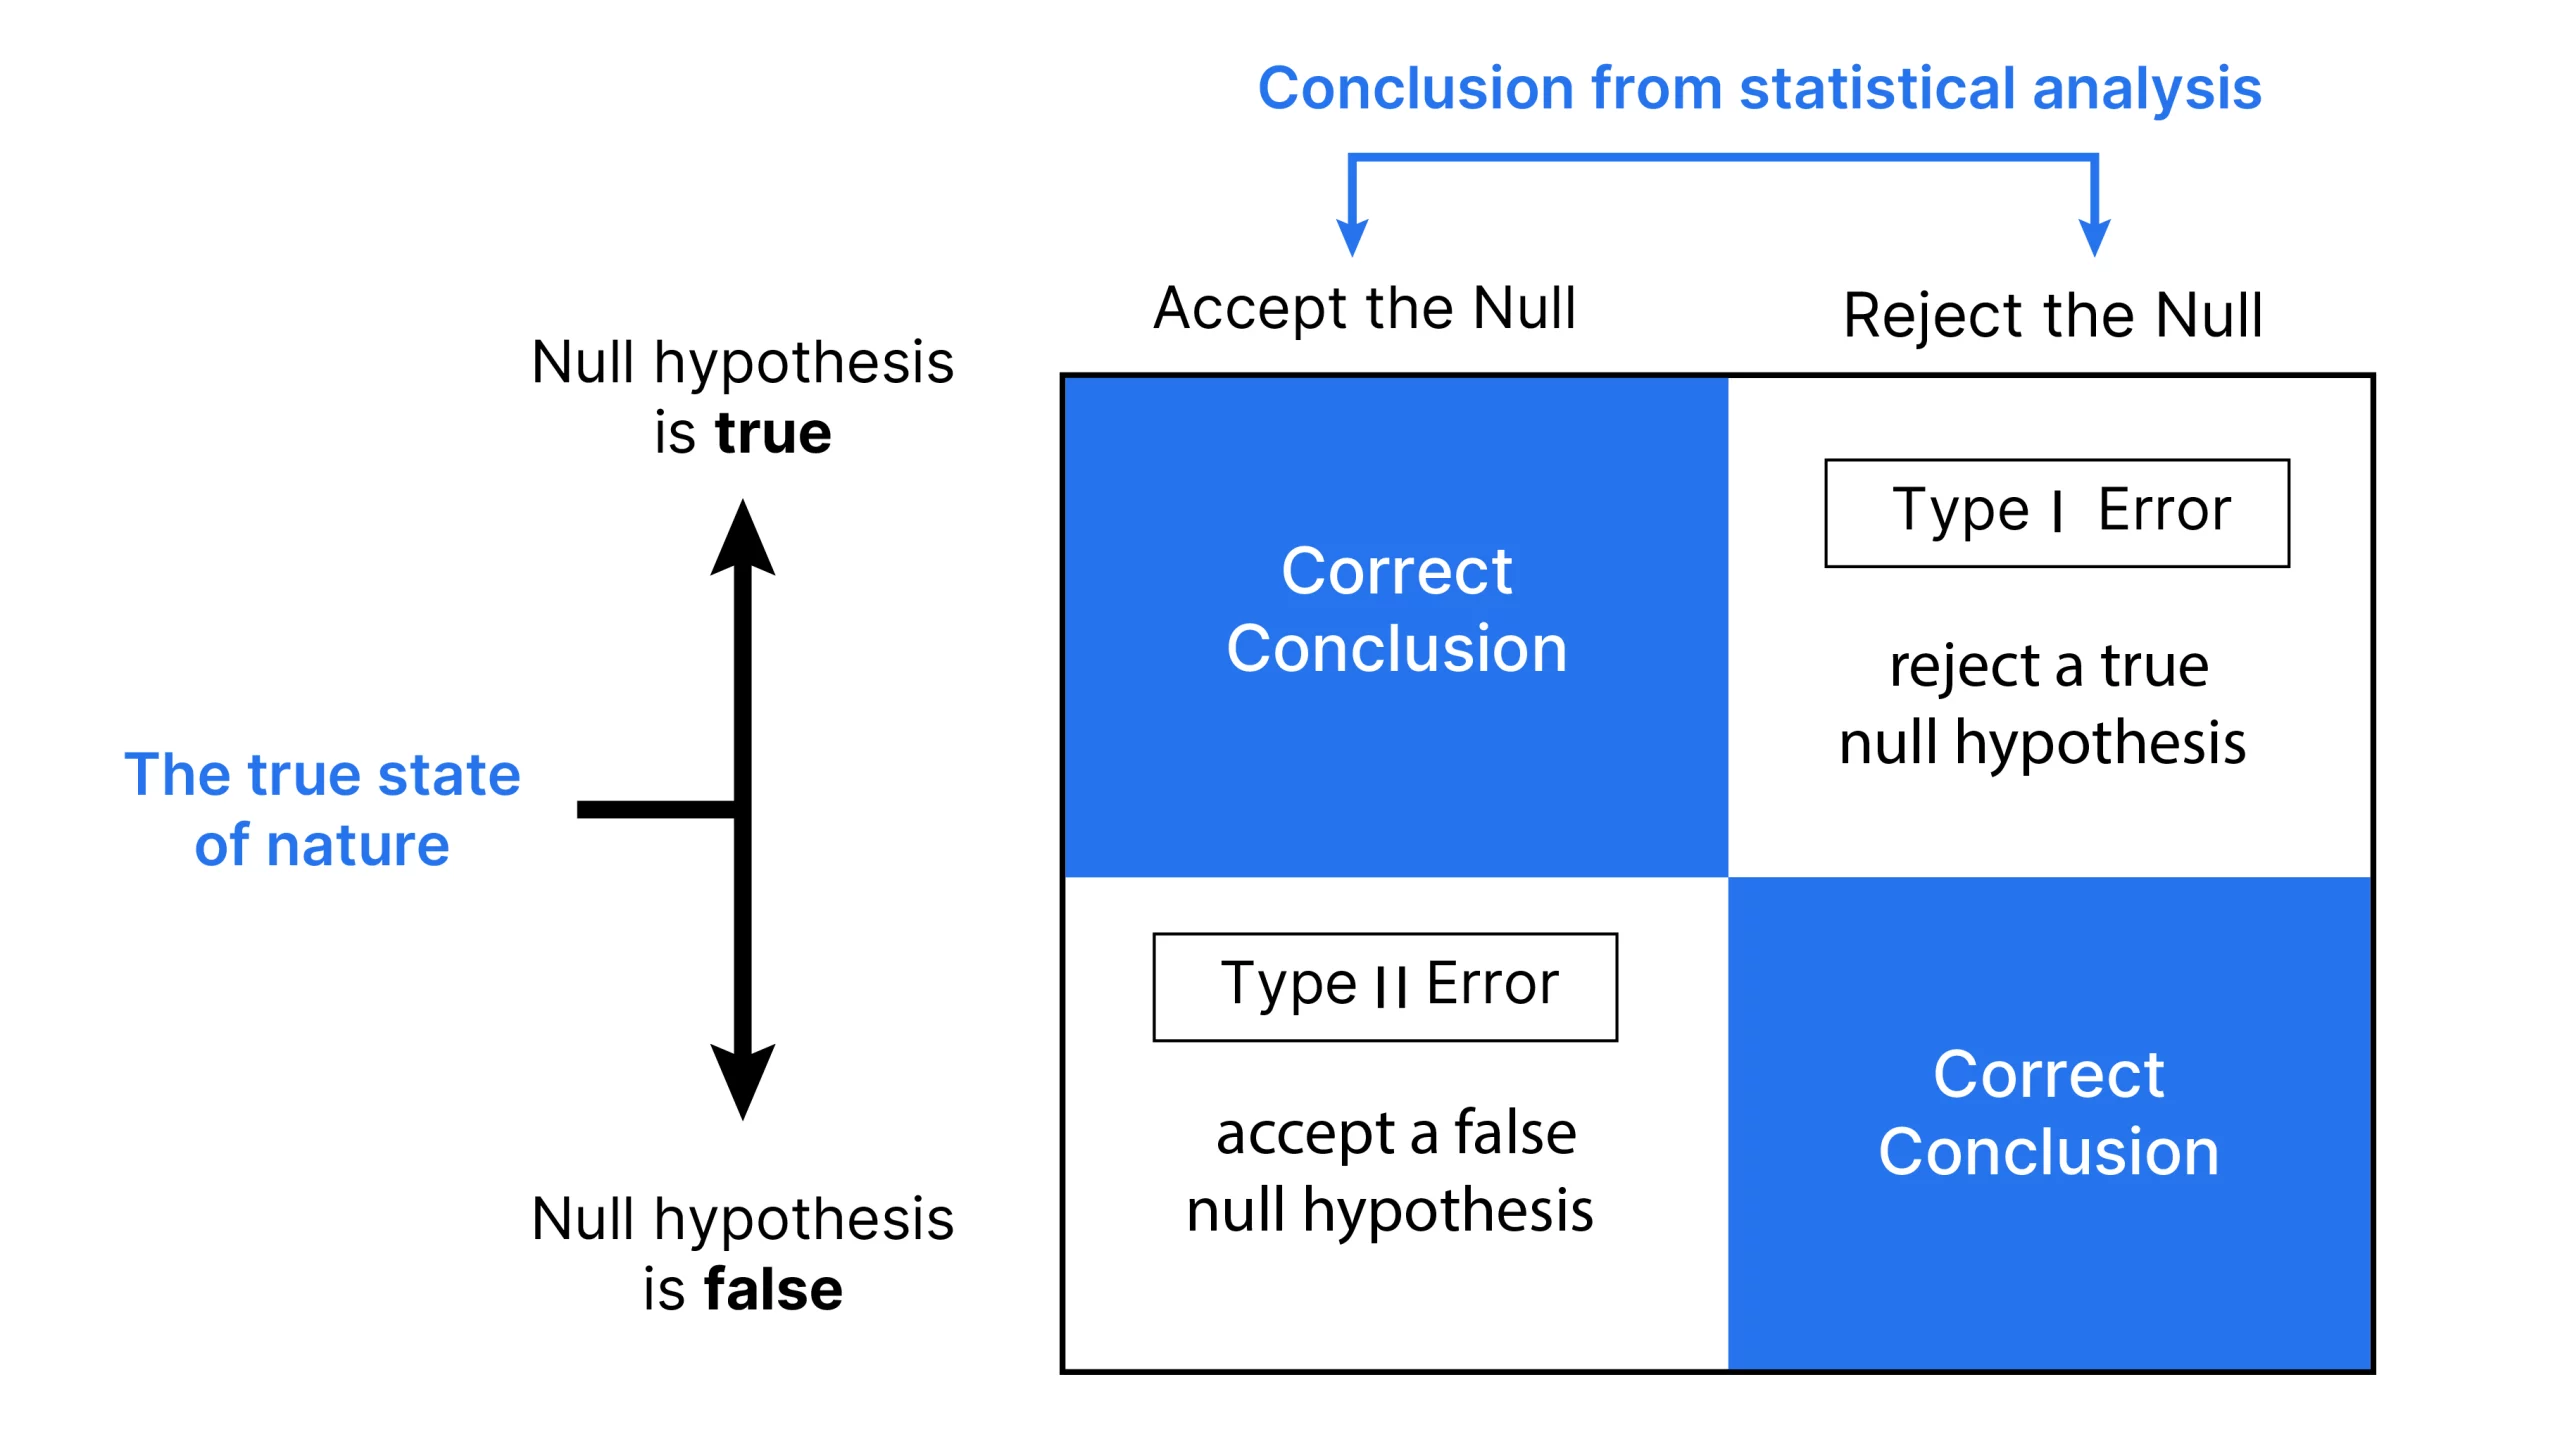 Evaluating the hypothesis